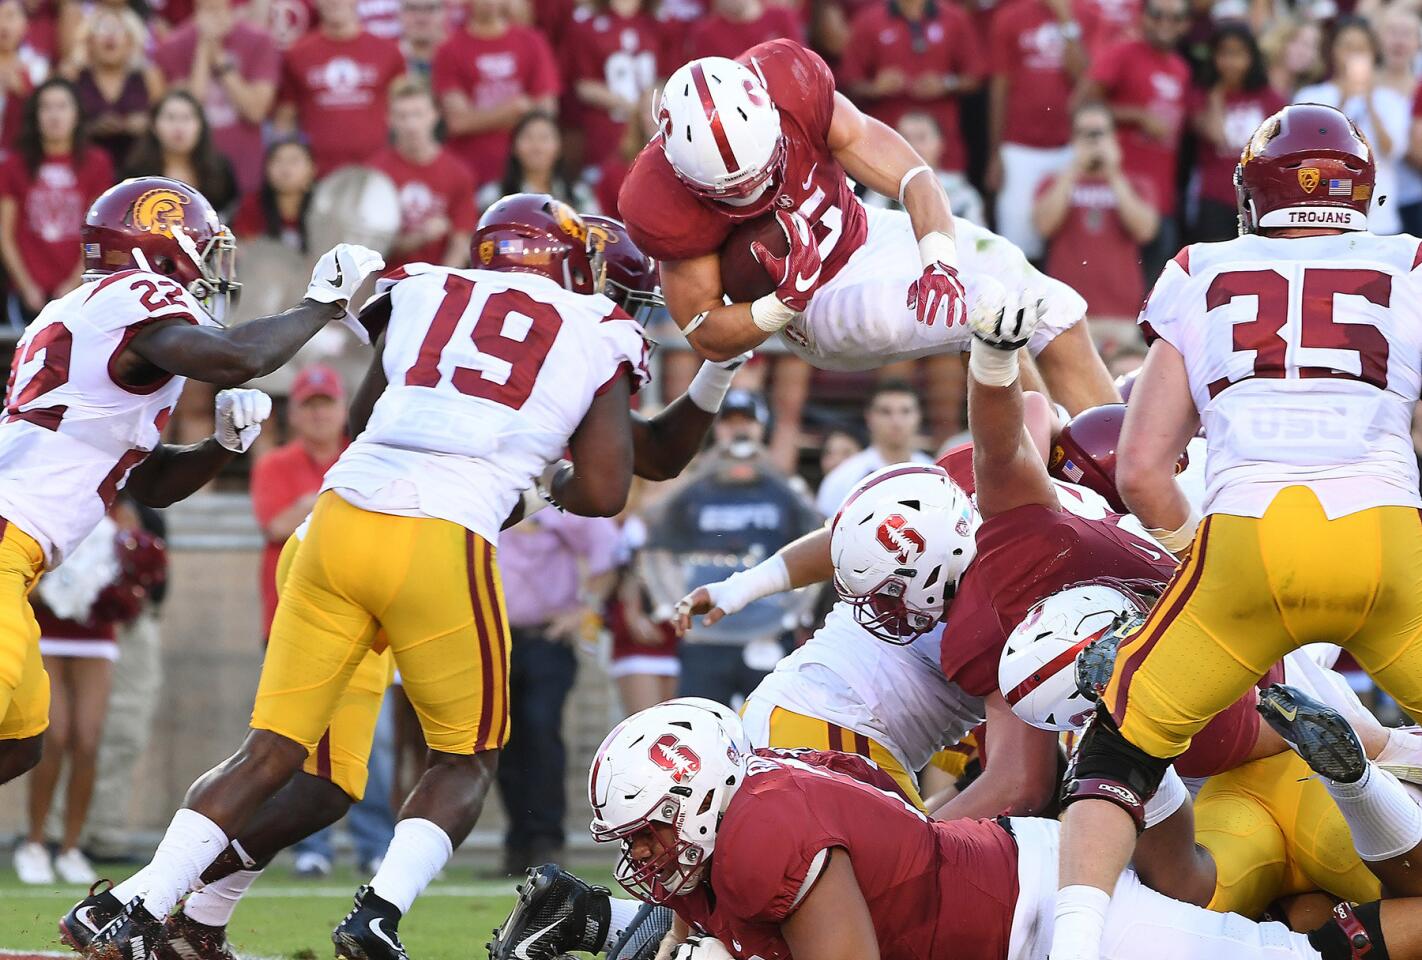 Stanford running back Christian McCaffrey dives over the USC defenders but is stopped short of the goal line. McCaffrey would score a touchdown on the next play.